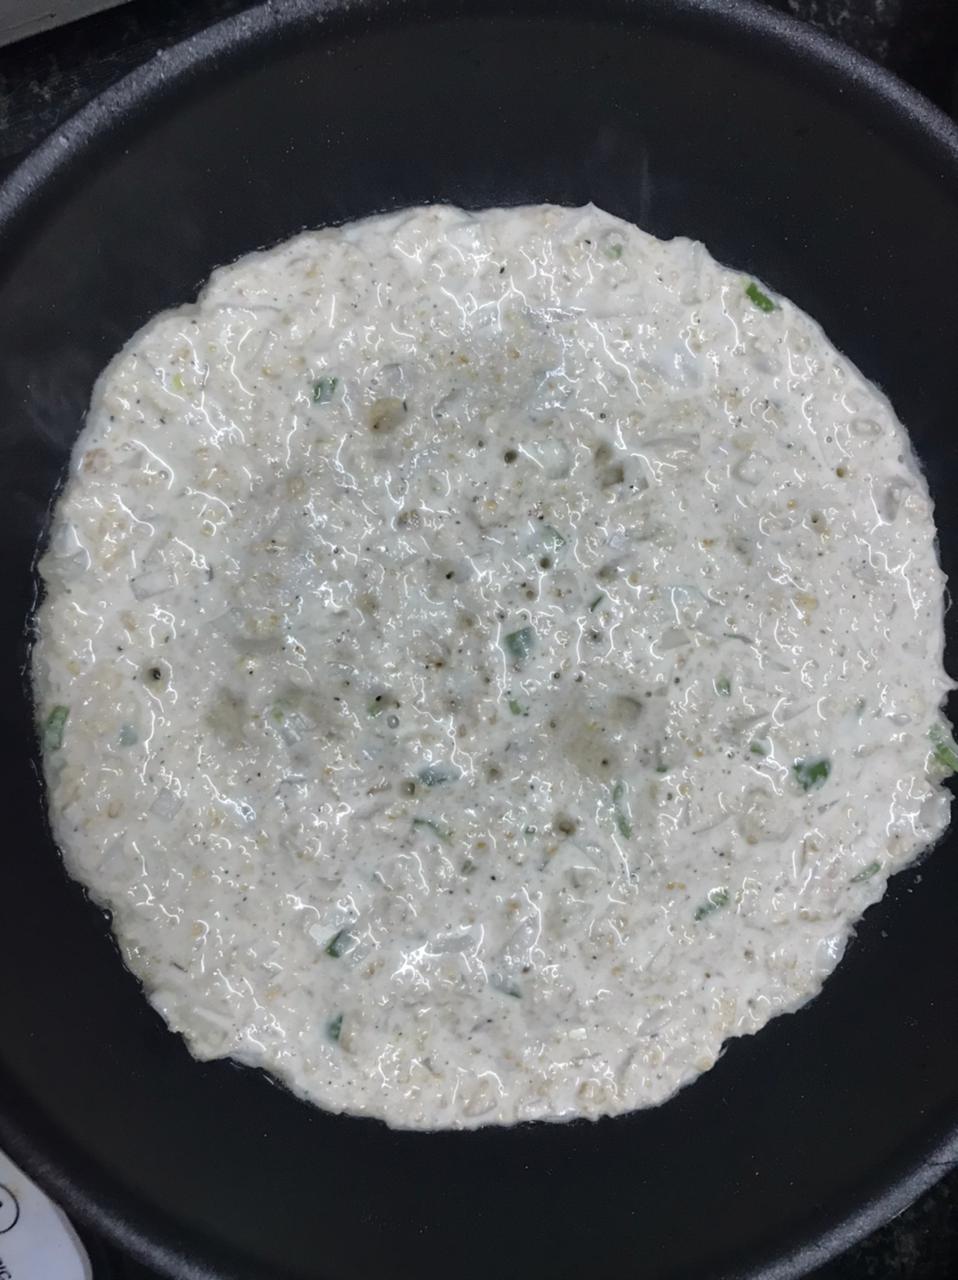 Spreading oats chilla batter on a pan